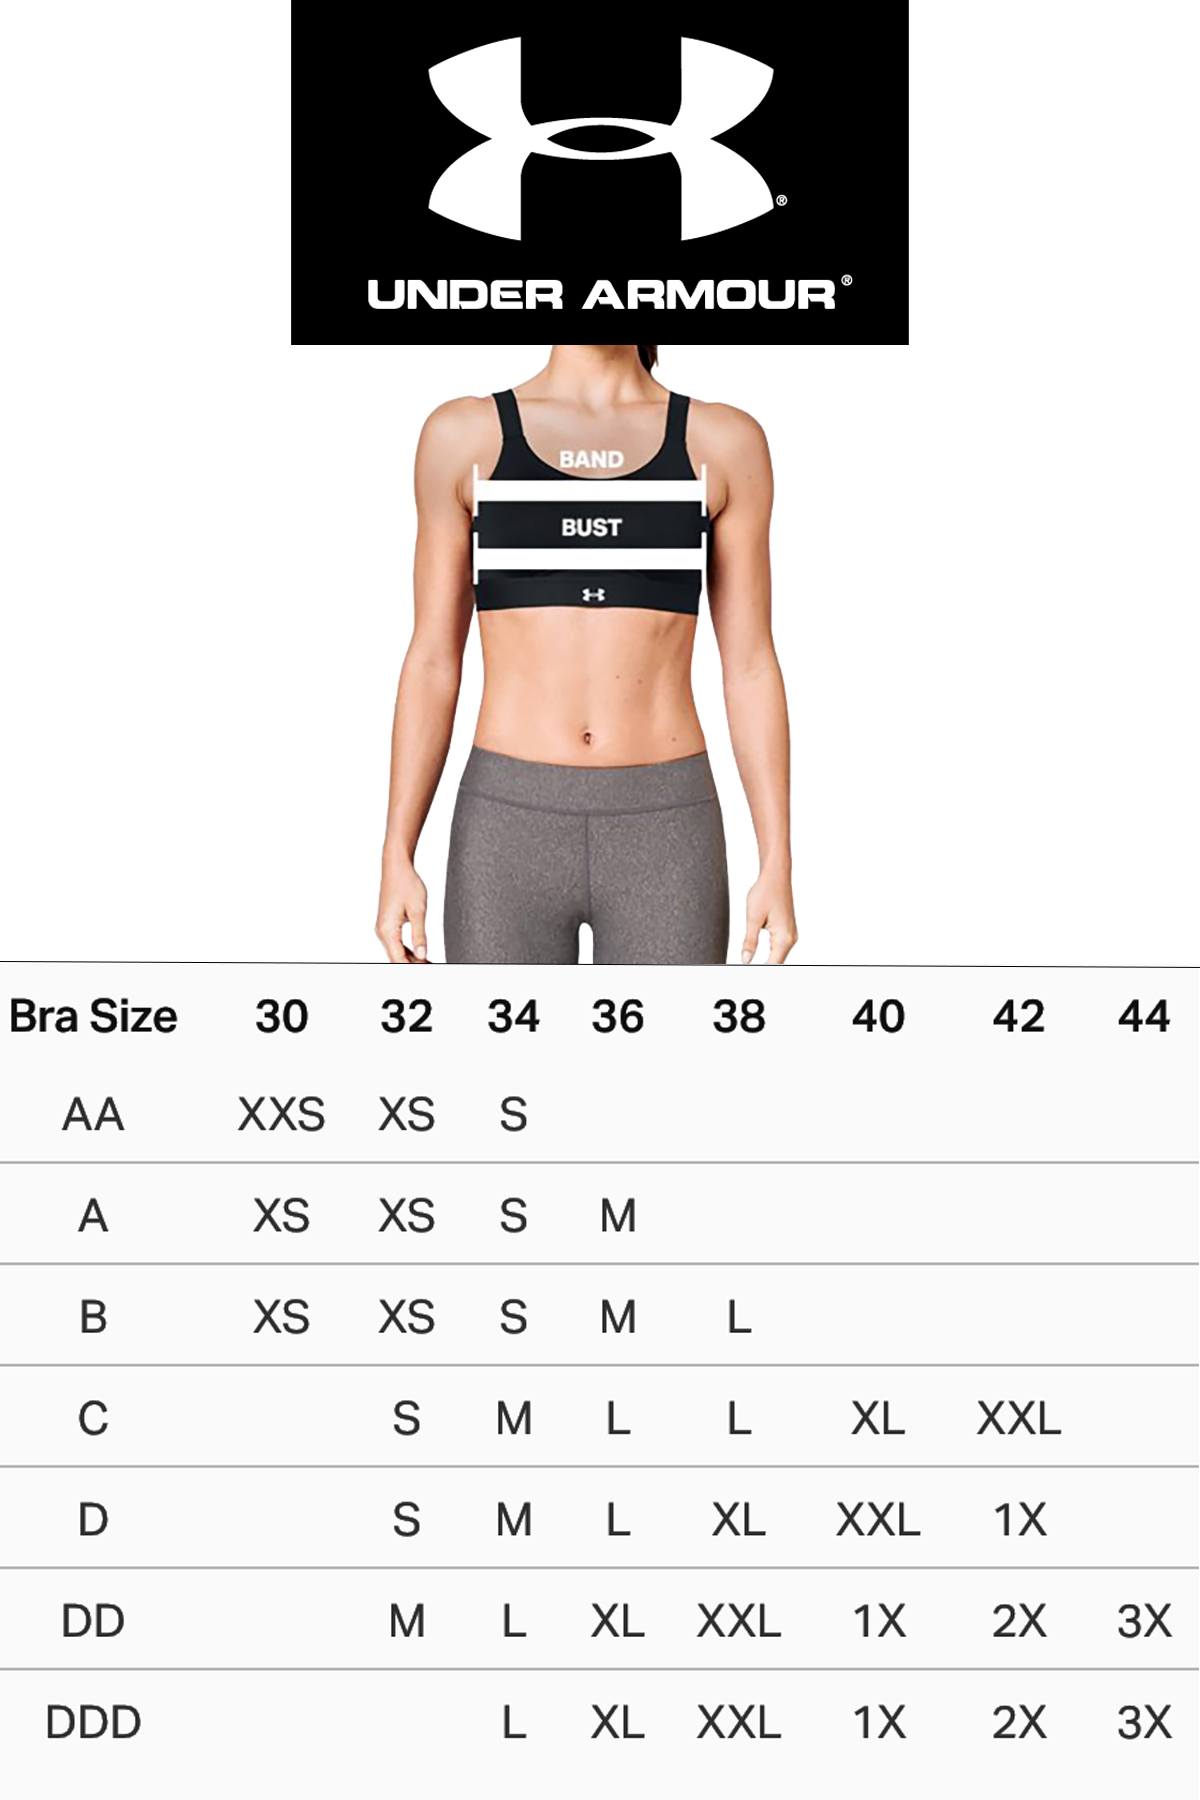 Pin by Millynakayenga on size  Under armour women, Bra size charts, Under  armour